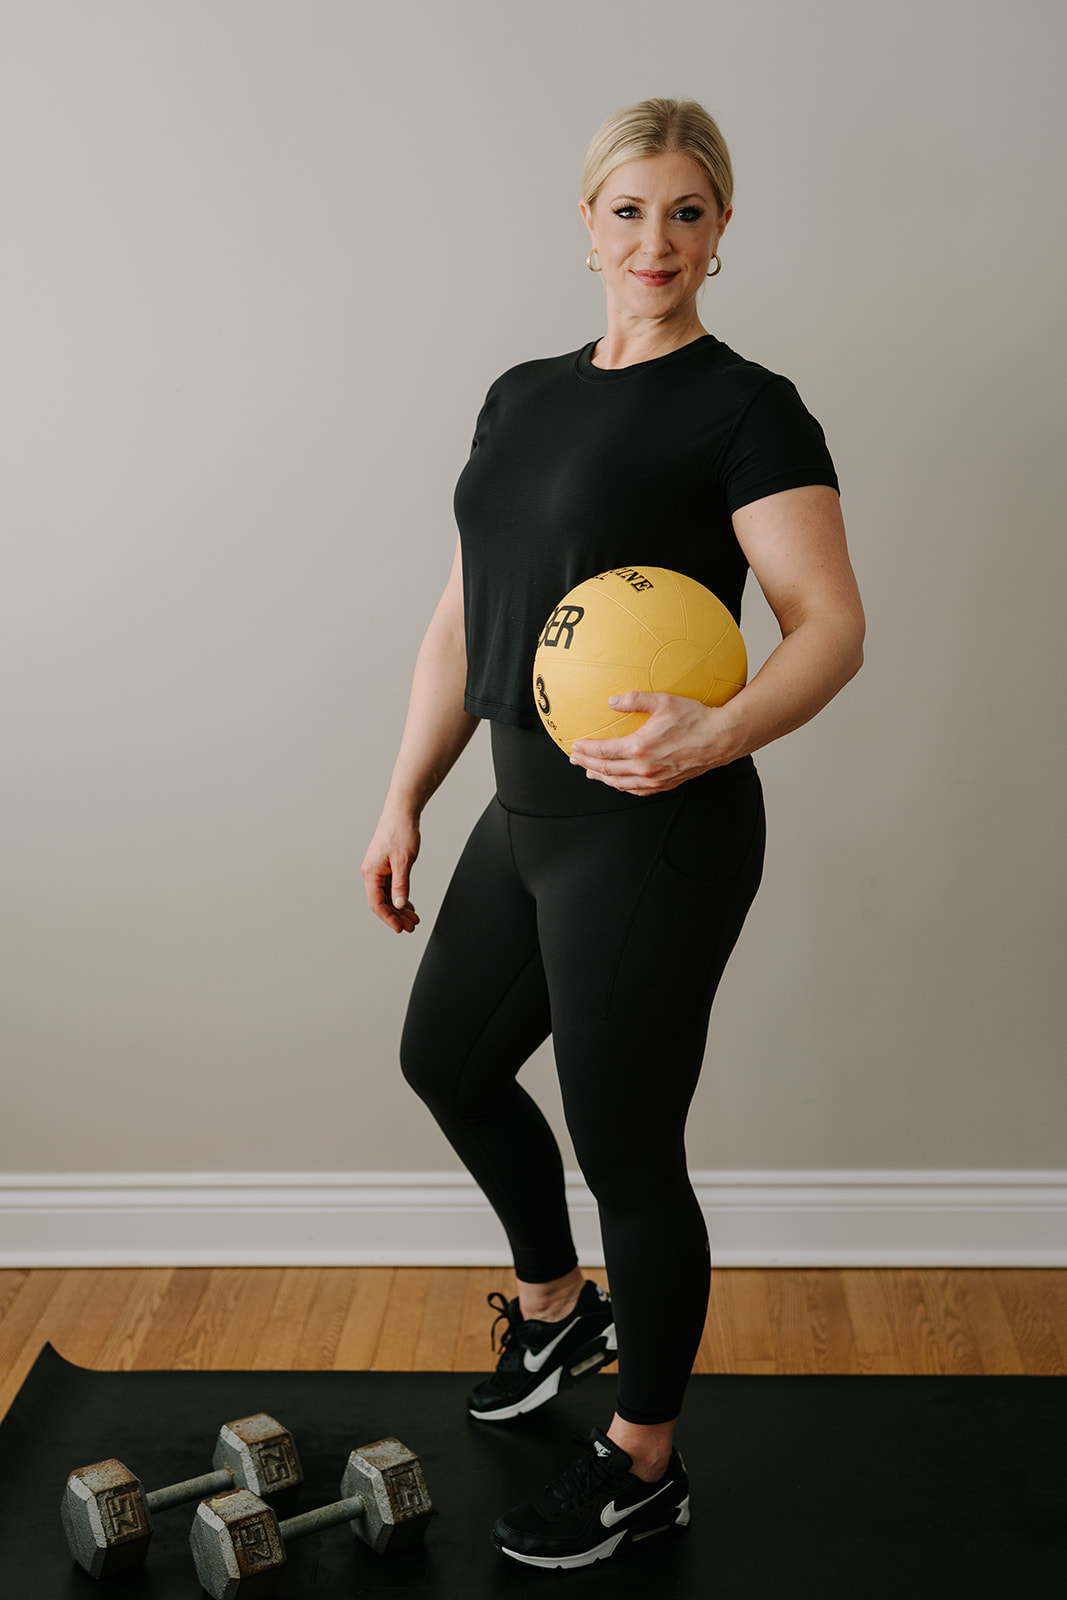 personal trainer with yellow medicine ball